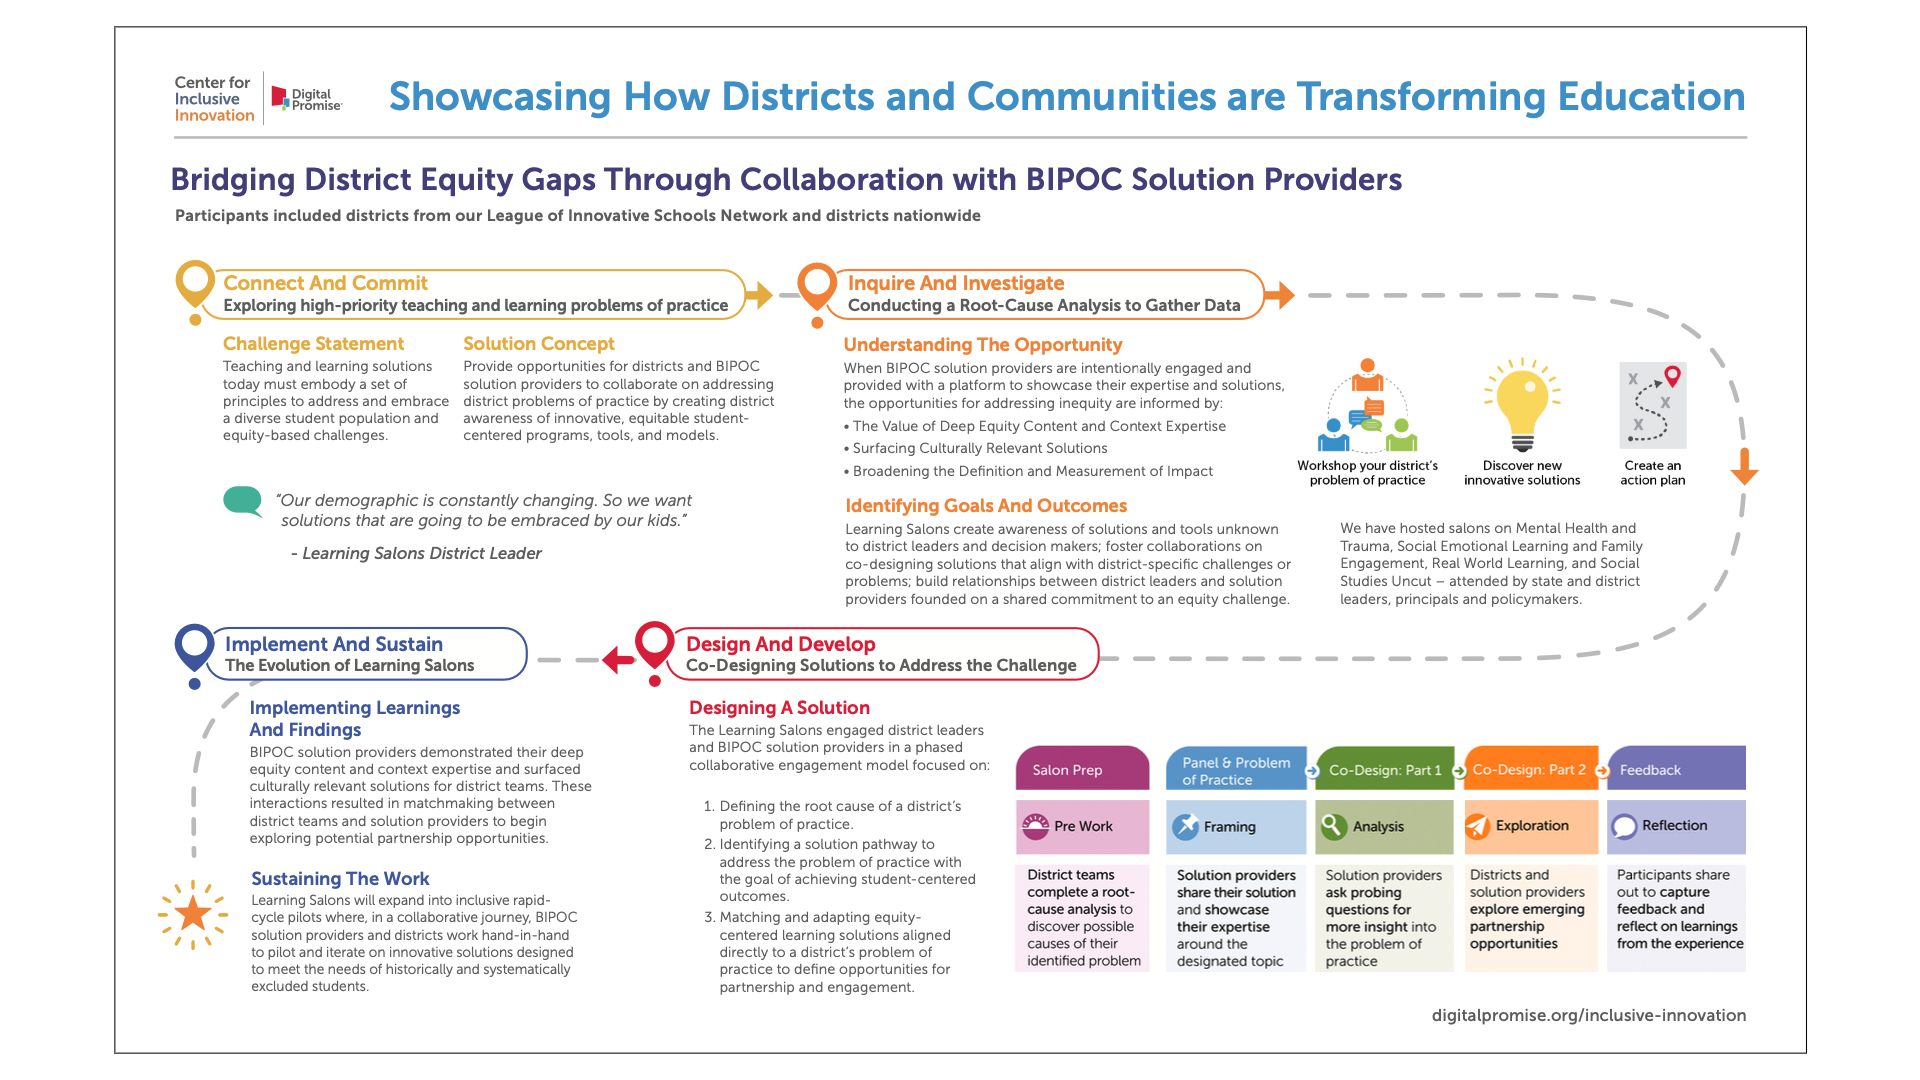 Bridging District Equity Gaps Through Collaboration with BIPOC Solution Providers